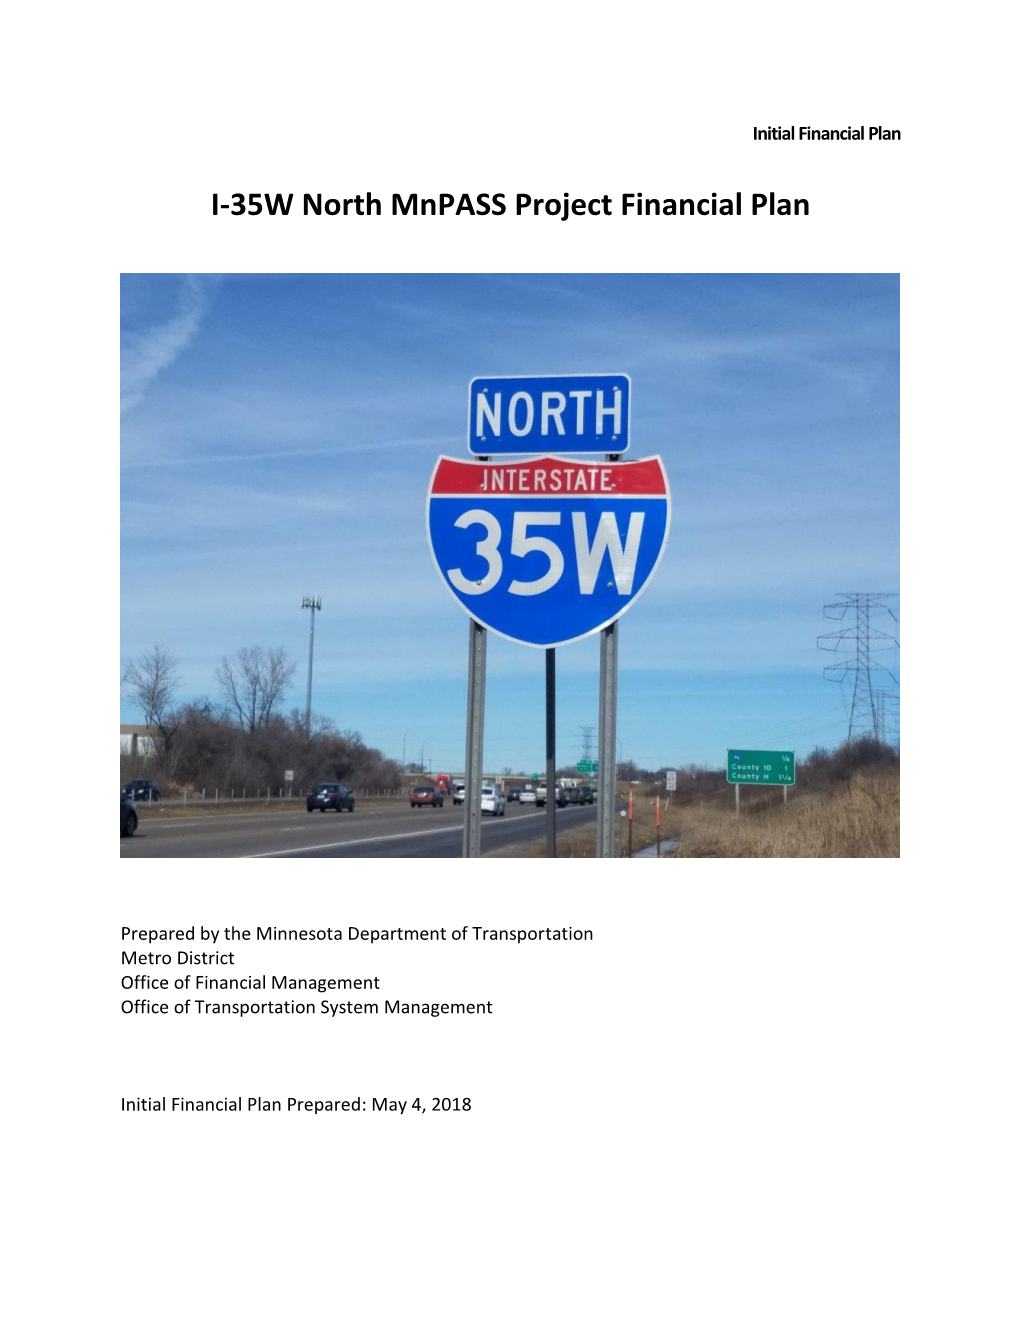 I-35W North Mnpass Project Financial Plan